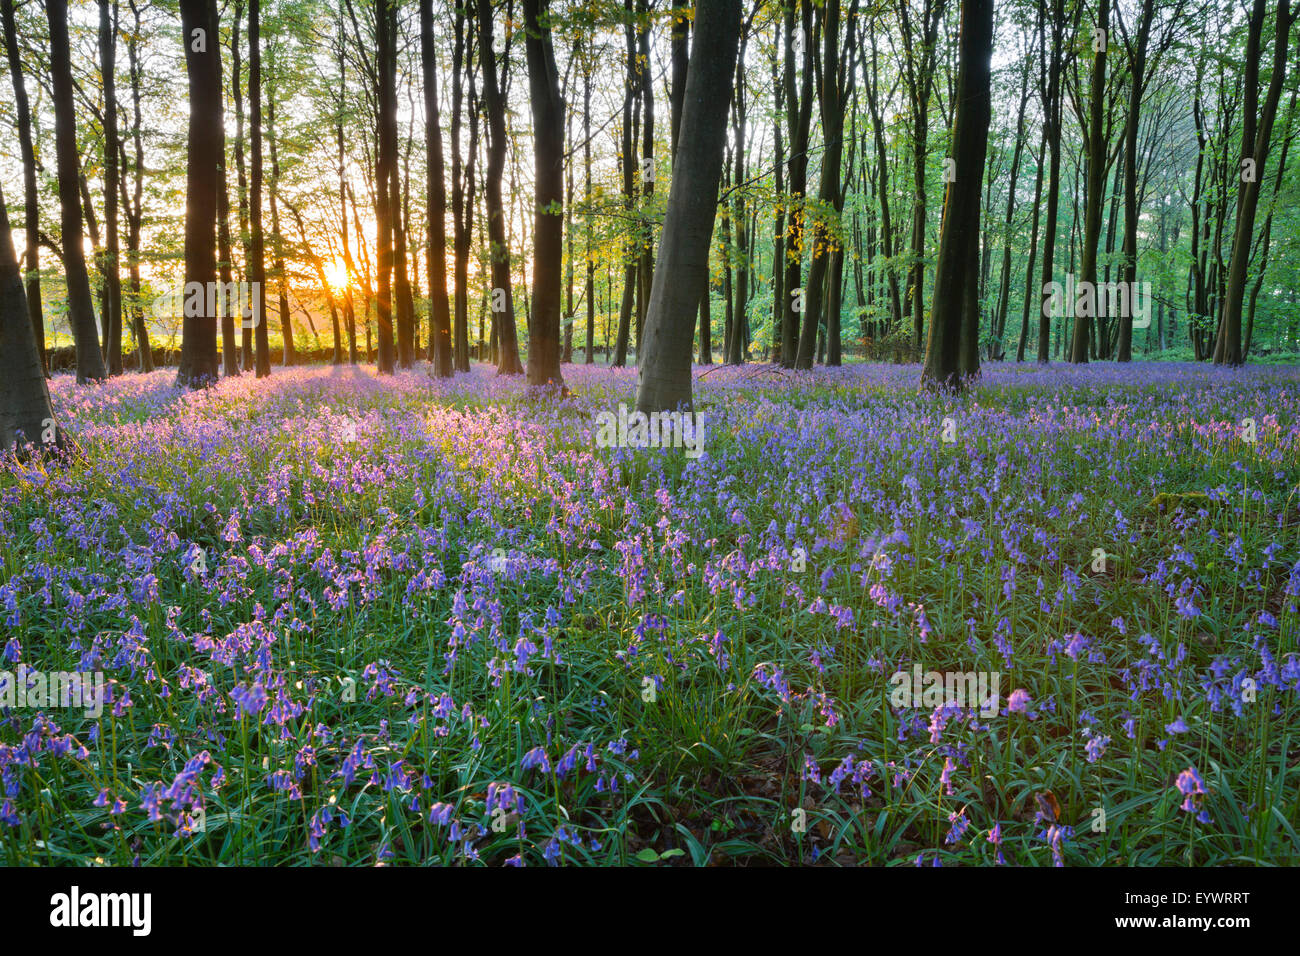 Bluebell wood, Stow-su-il-Wold, Cotswolds, Gloucestershire, England, Regno Unito, Europa Foto Stock